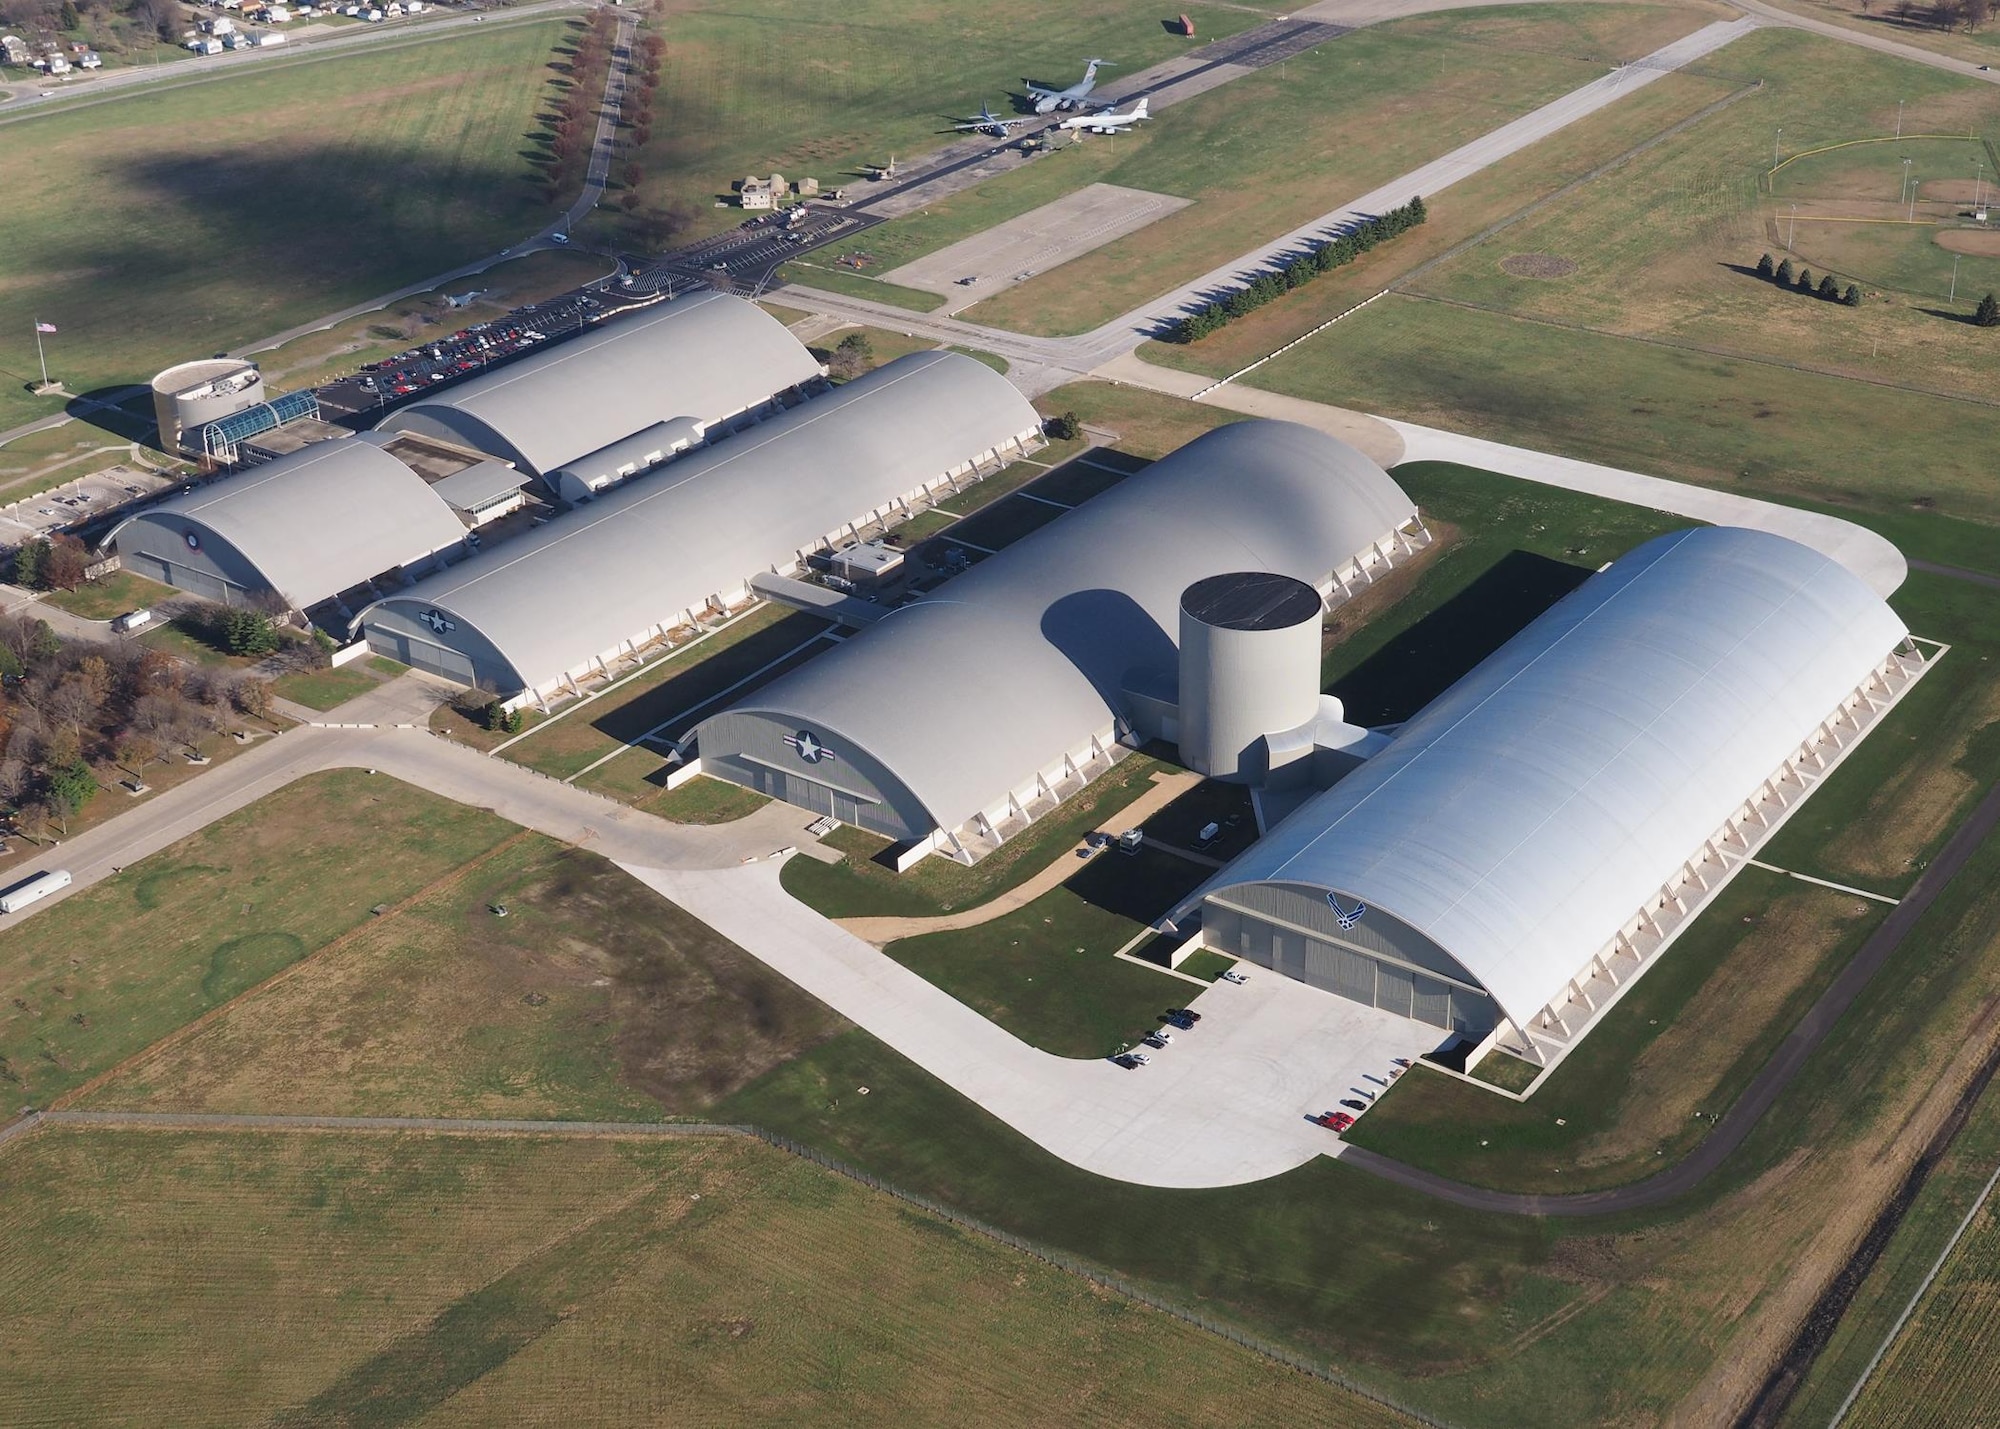 Aerial view of the National Museum of the U.S. Air Force during construction of the museum's fourth building on Nov. 13, 2015. The 224,000 square foot building, which is scheduled to open to the public in June of 2016, is being privately financed by the Air Force Museum Foundation, a non-profit organization chartered to assist in the development and expansion of the museum's facilities. (Photo courtesy of McKenrick Lee Photography)